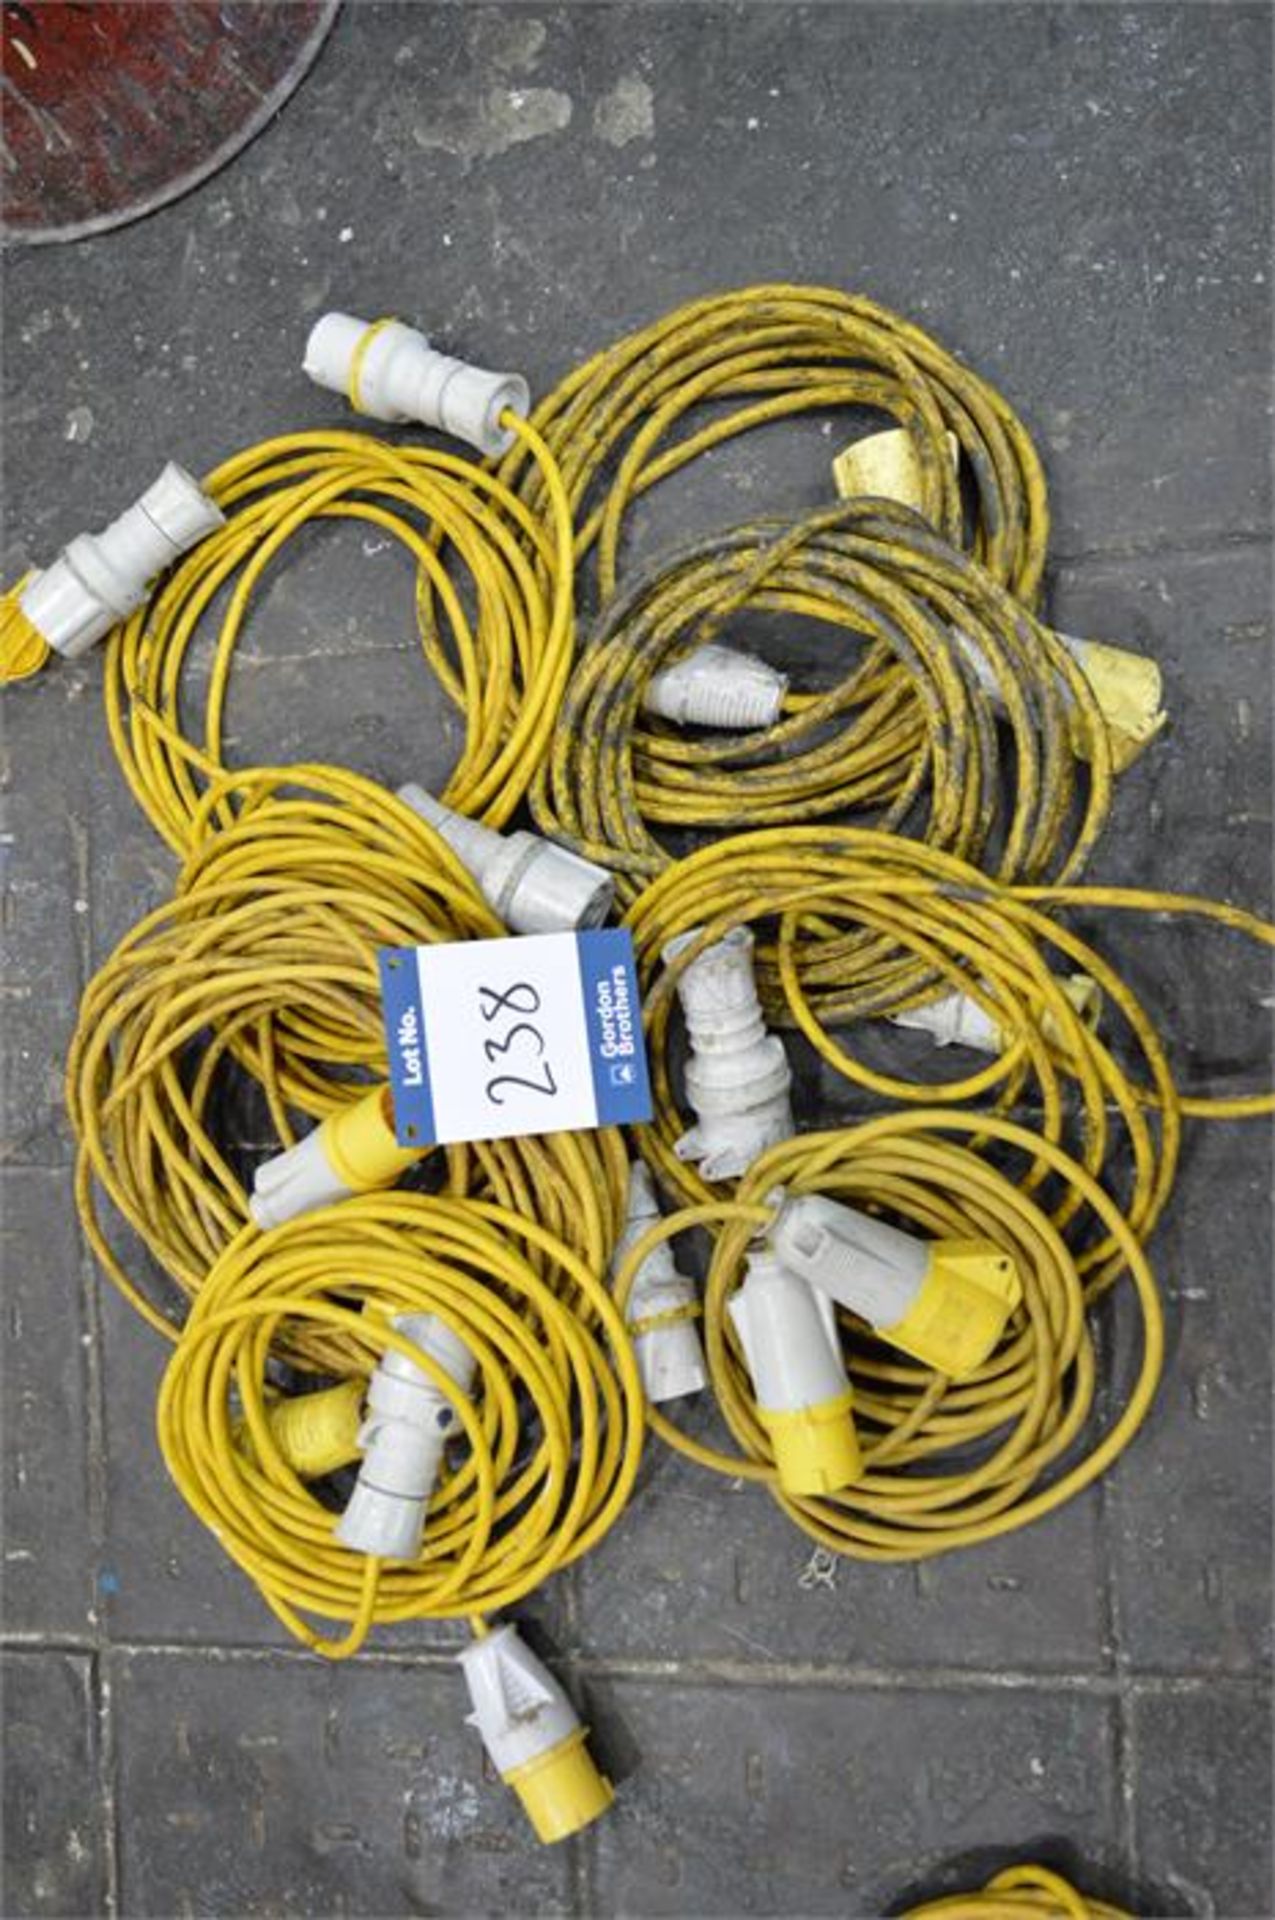 8 x 110v extension cables